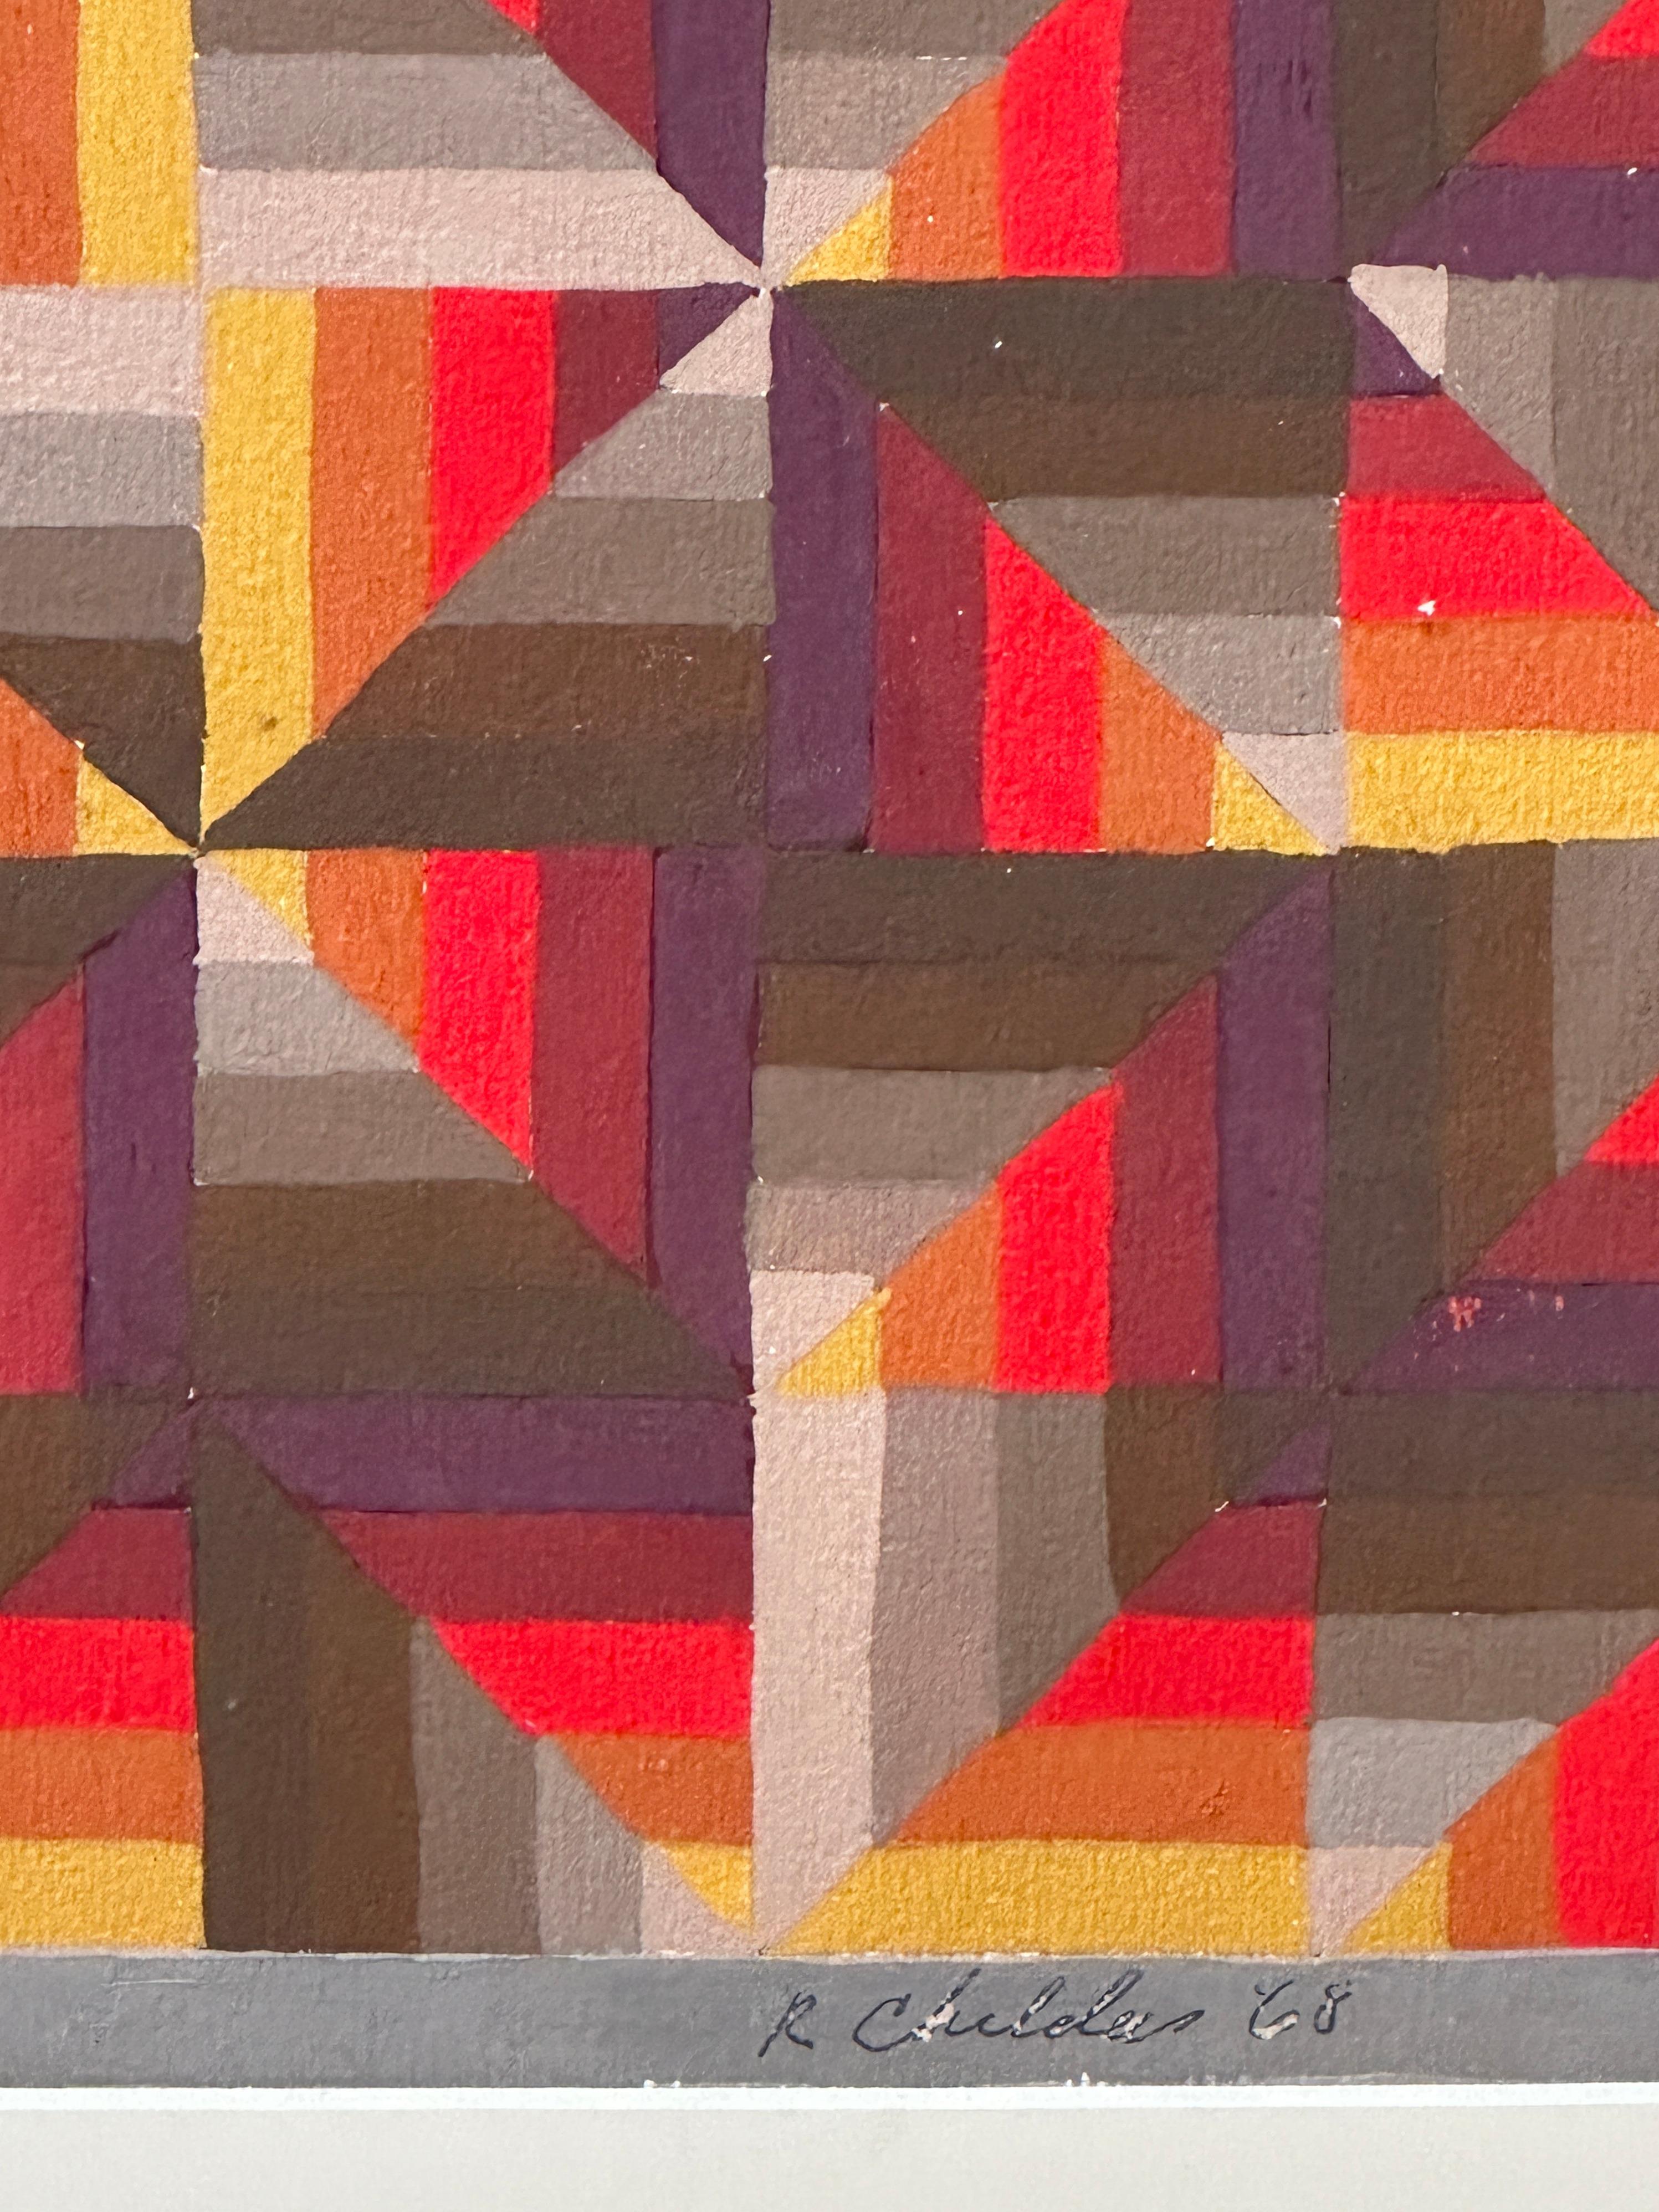 Modern Geometric Abstraction Acrylic Painting by Ron Childers #2